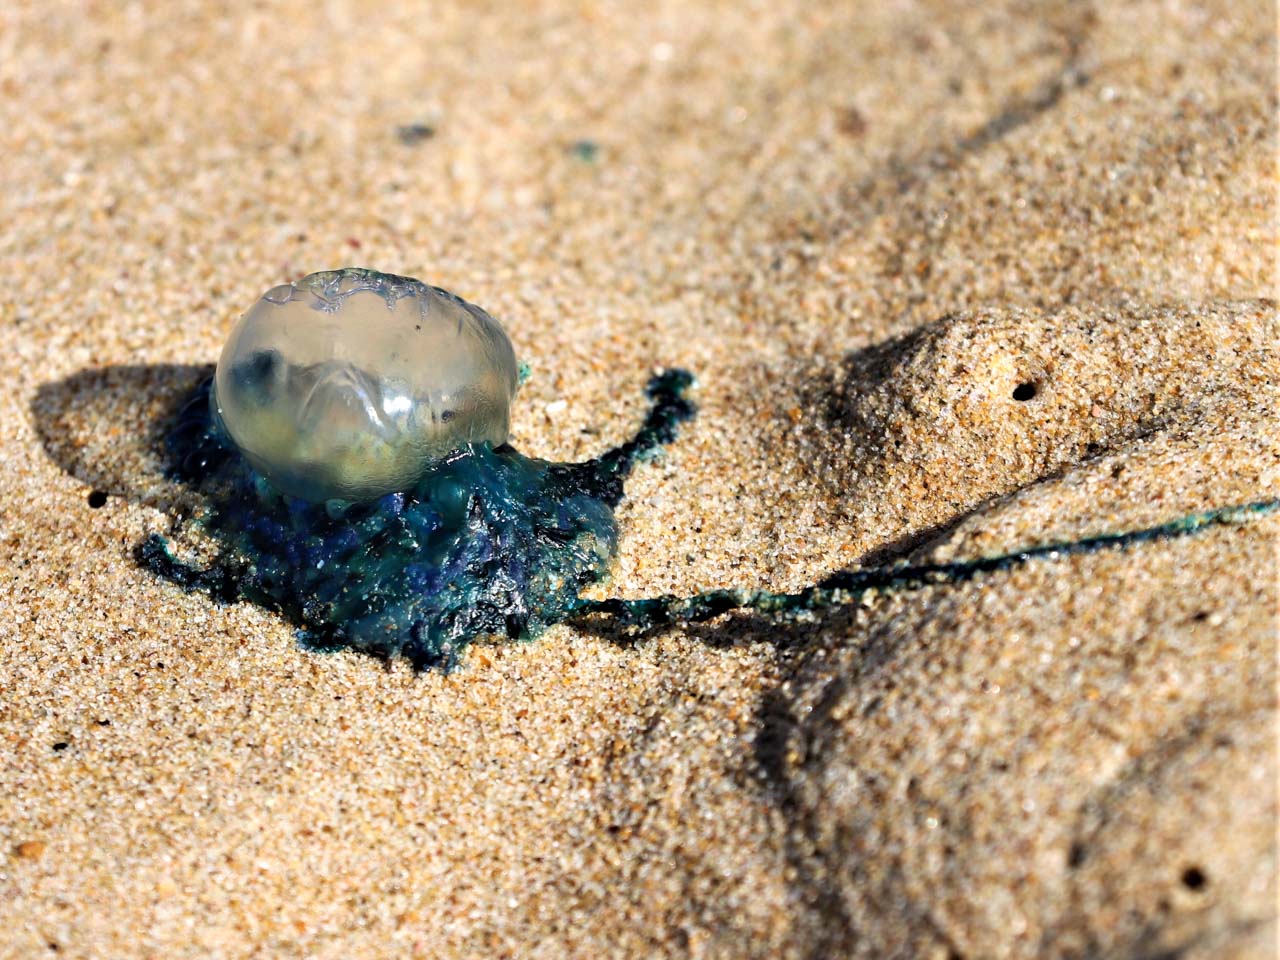 Bluebottle siphonophore on South African beach